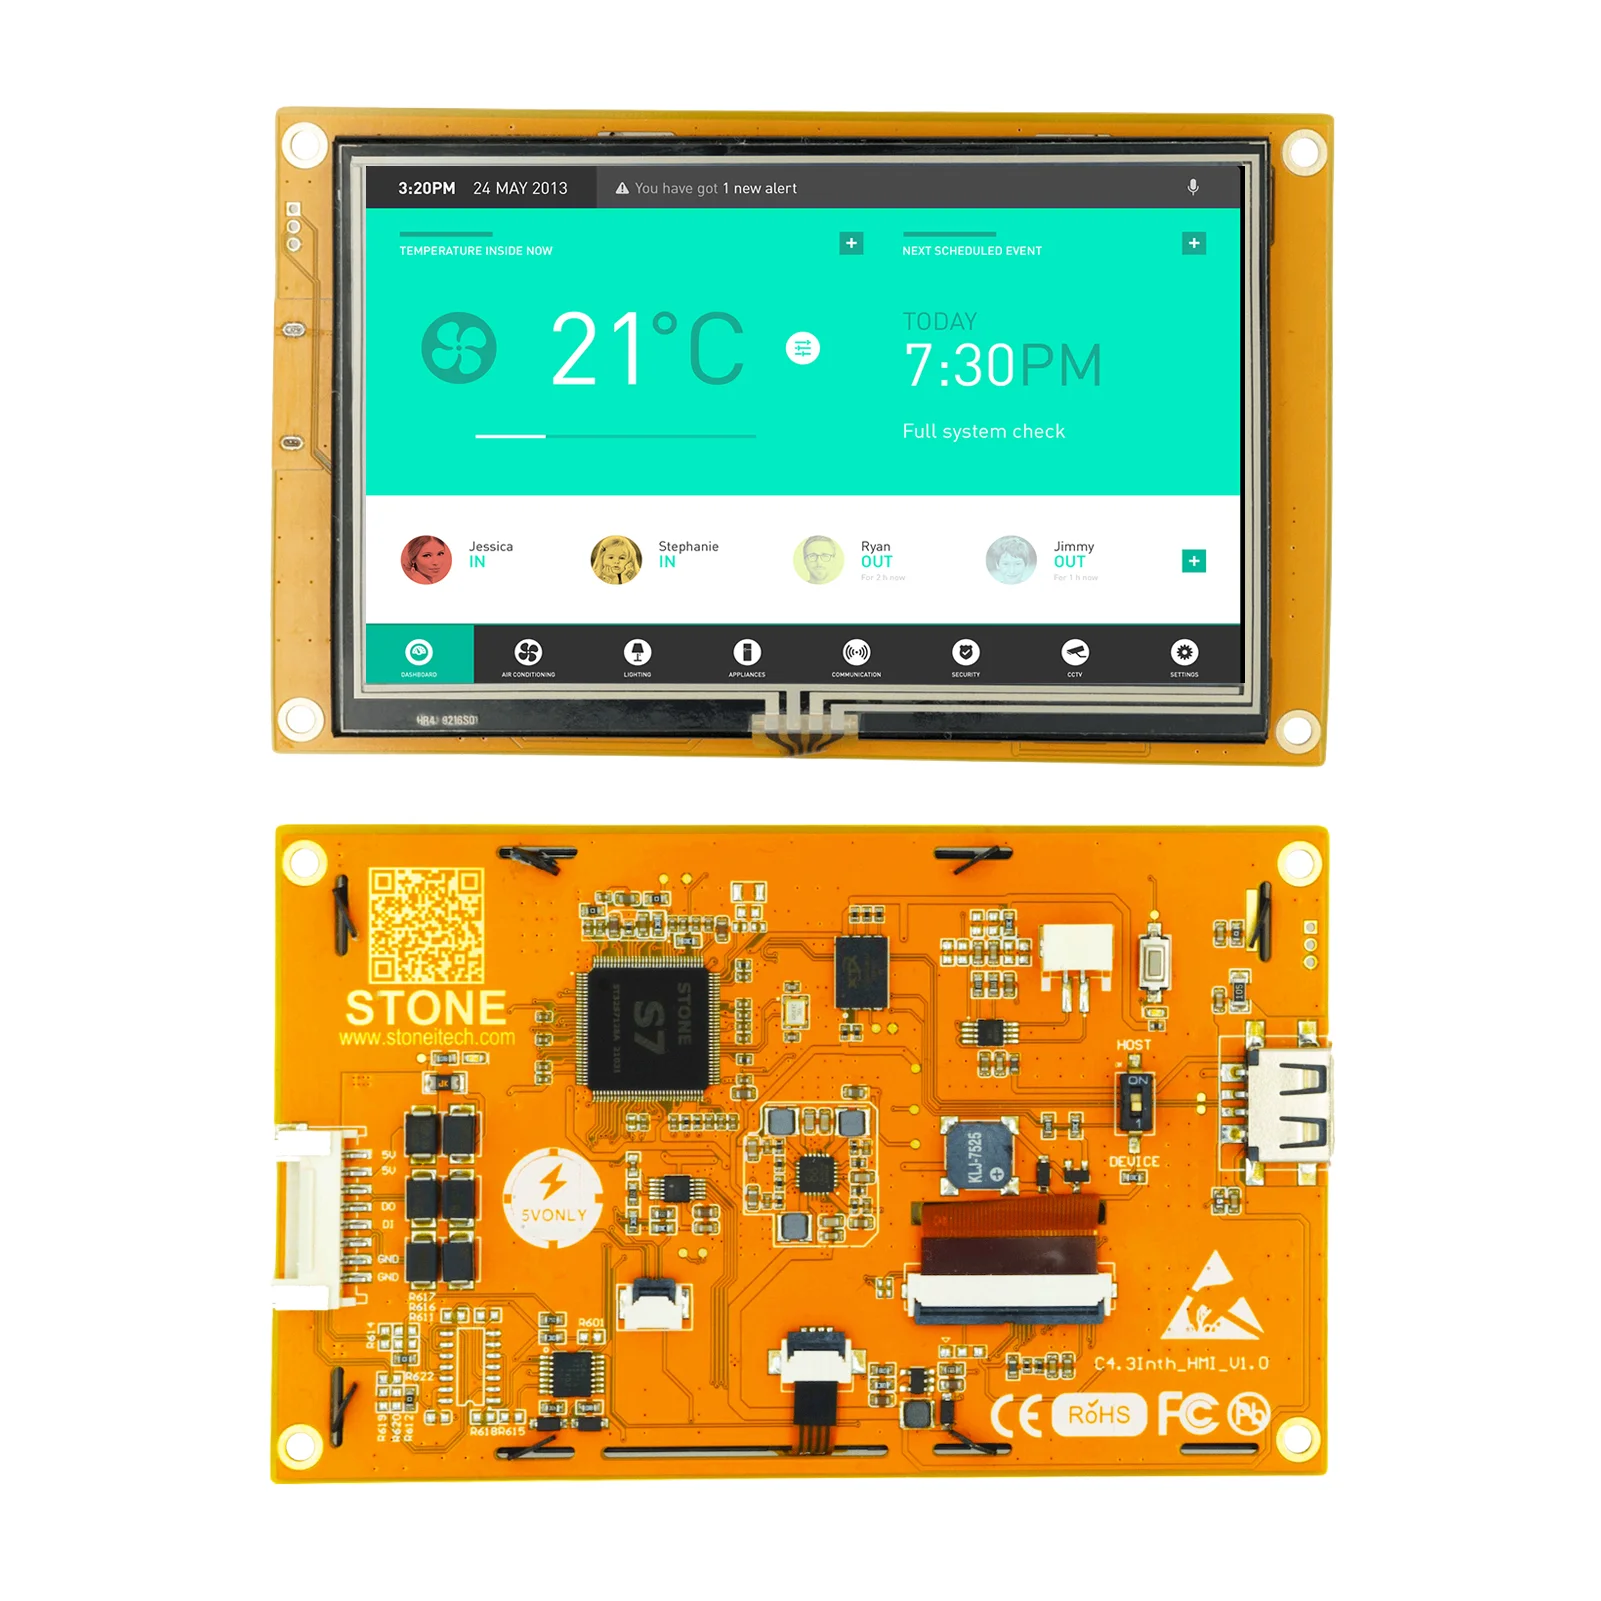 4 Inch LCD Display 480xRGBx272 Resolution Capacitive Touch Screen Support Systems for Raspberry Pi